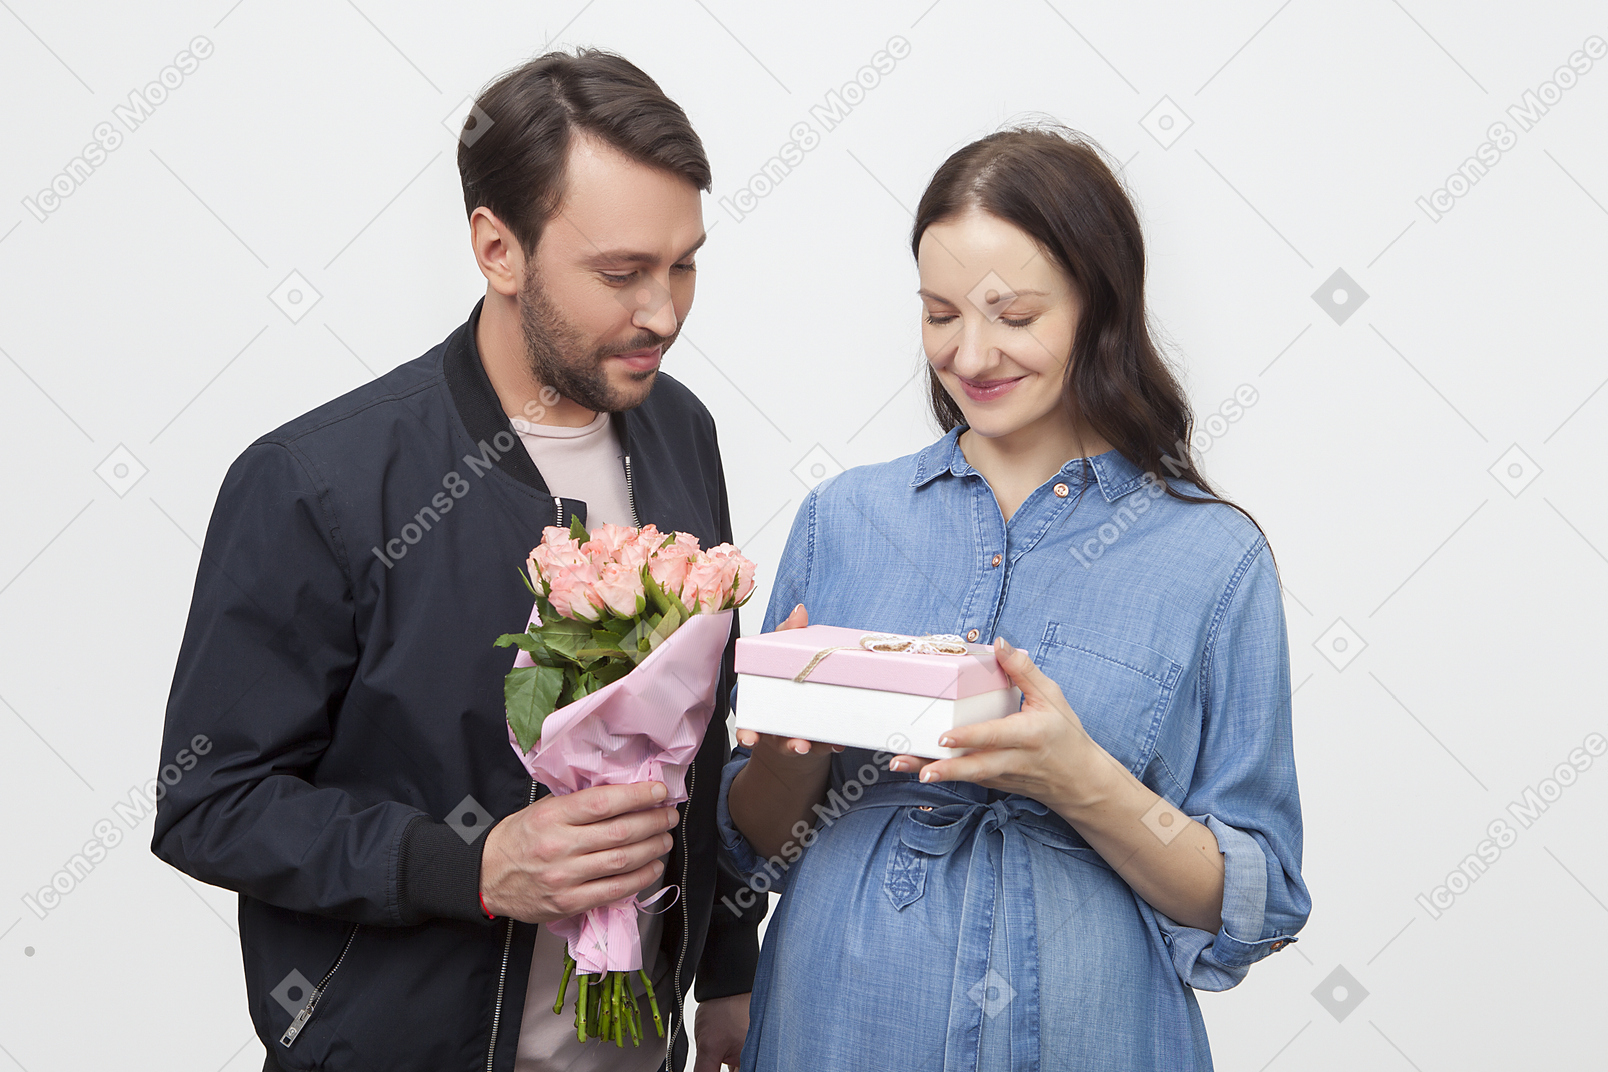 Man presenting gift and flowers to his wife